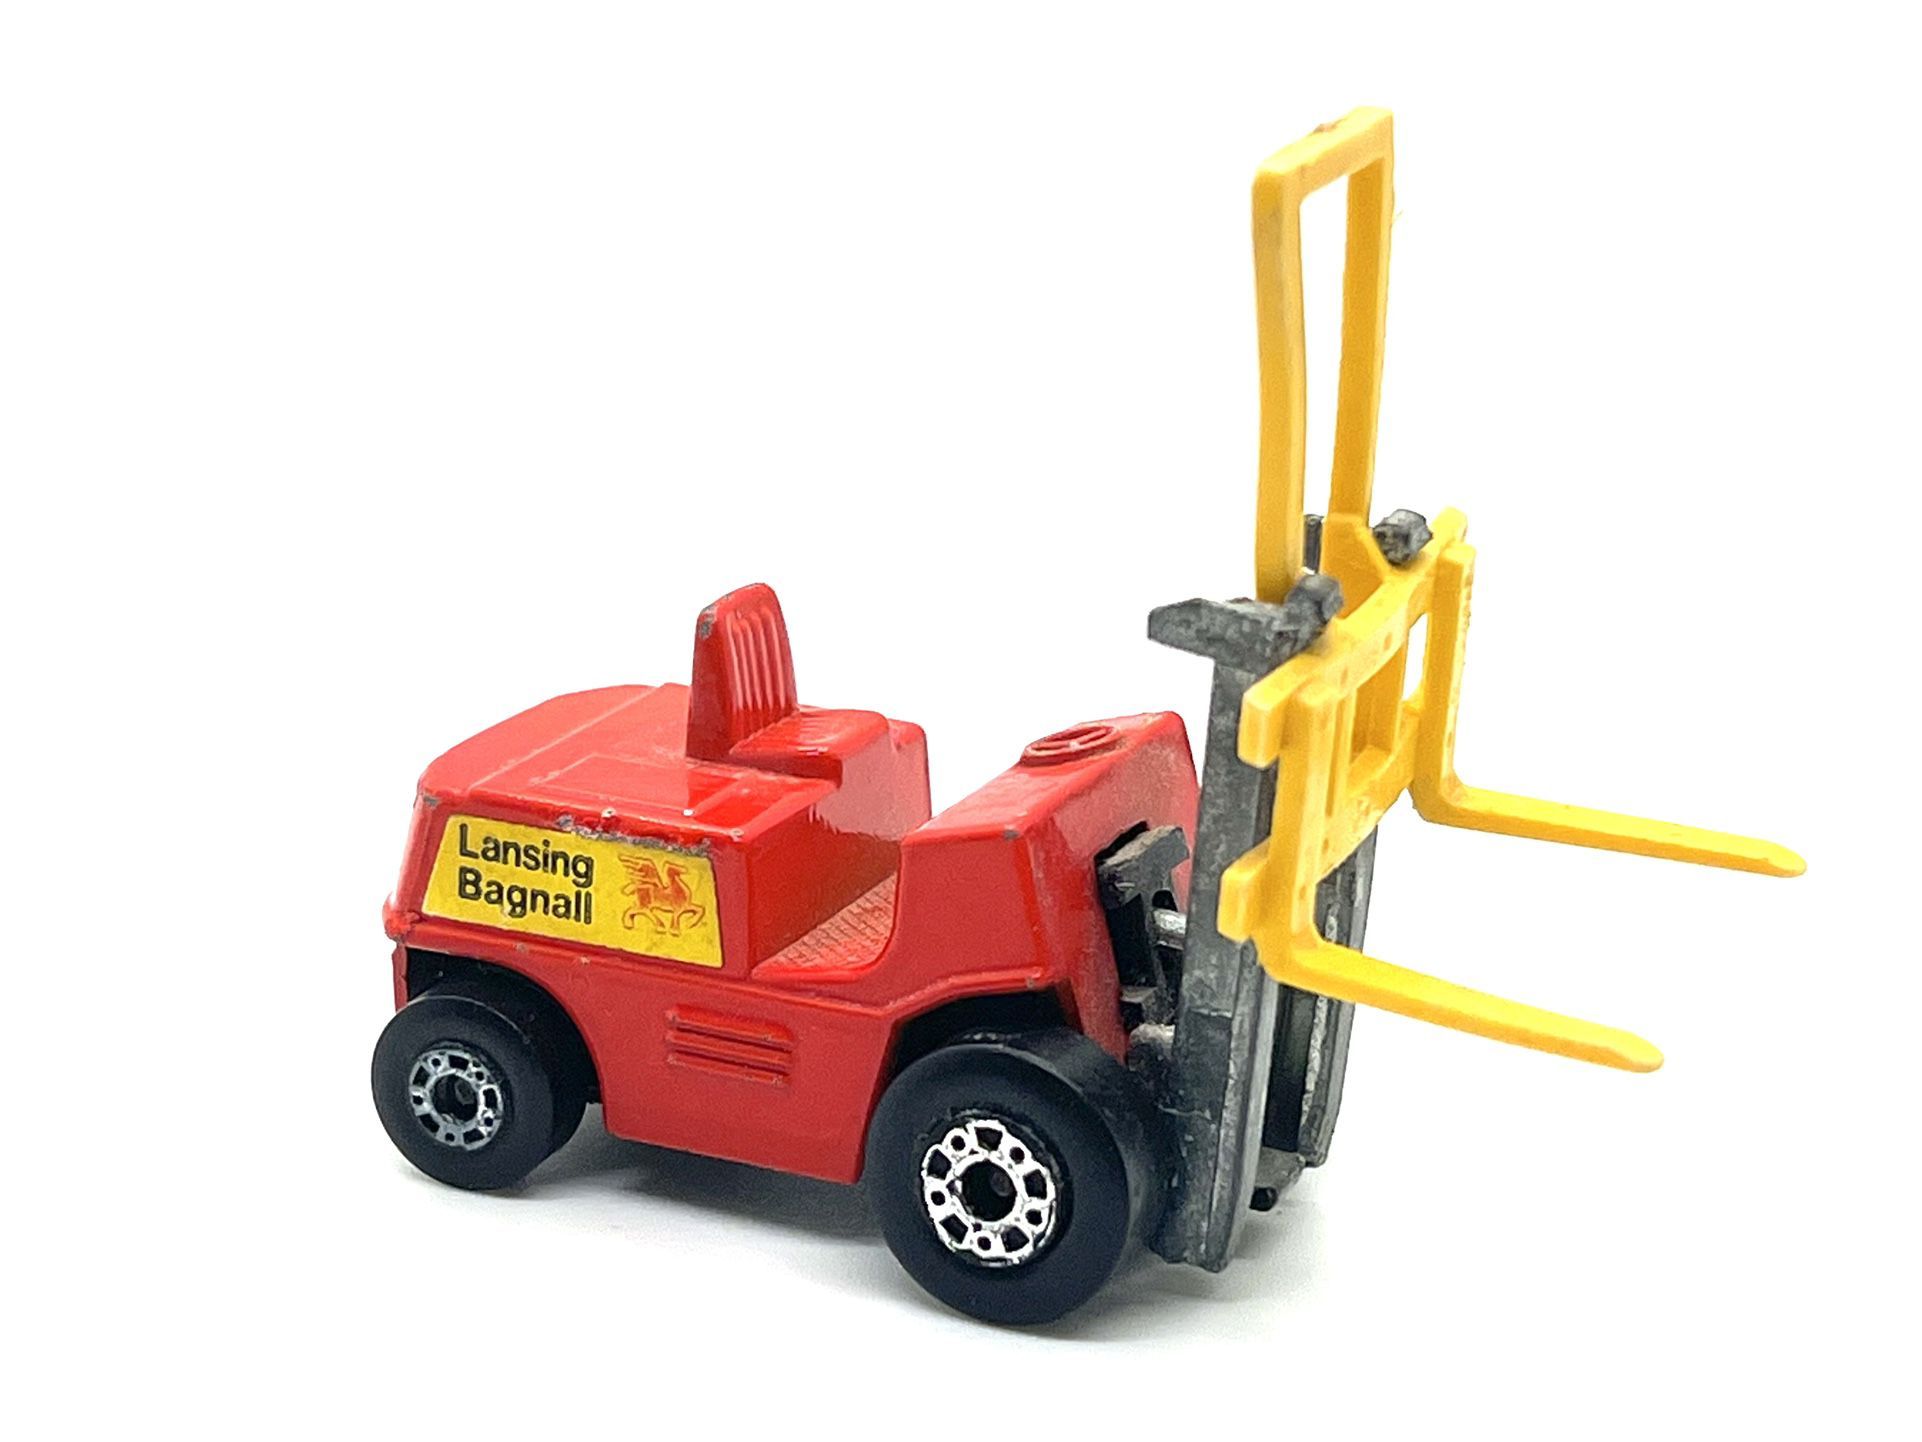 Vintage 1972 Matchbox Fork Lift Truck by Lesney #15 England Red Bagnall Loose